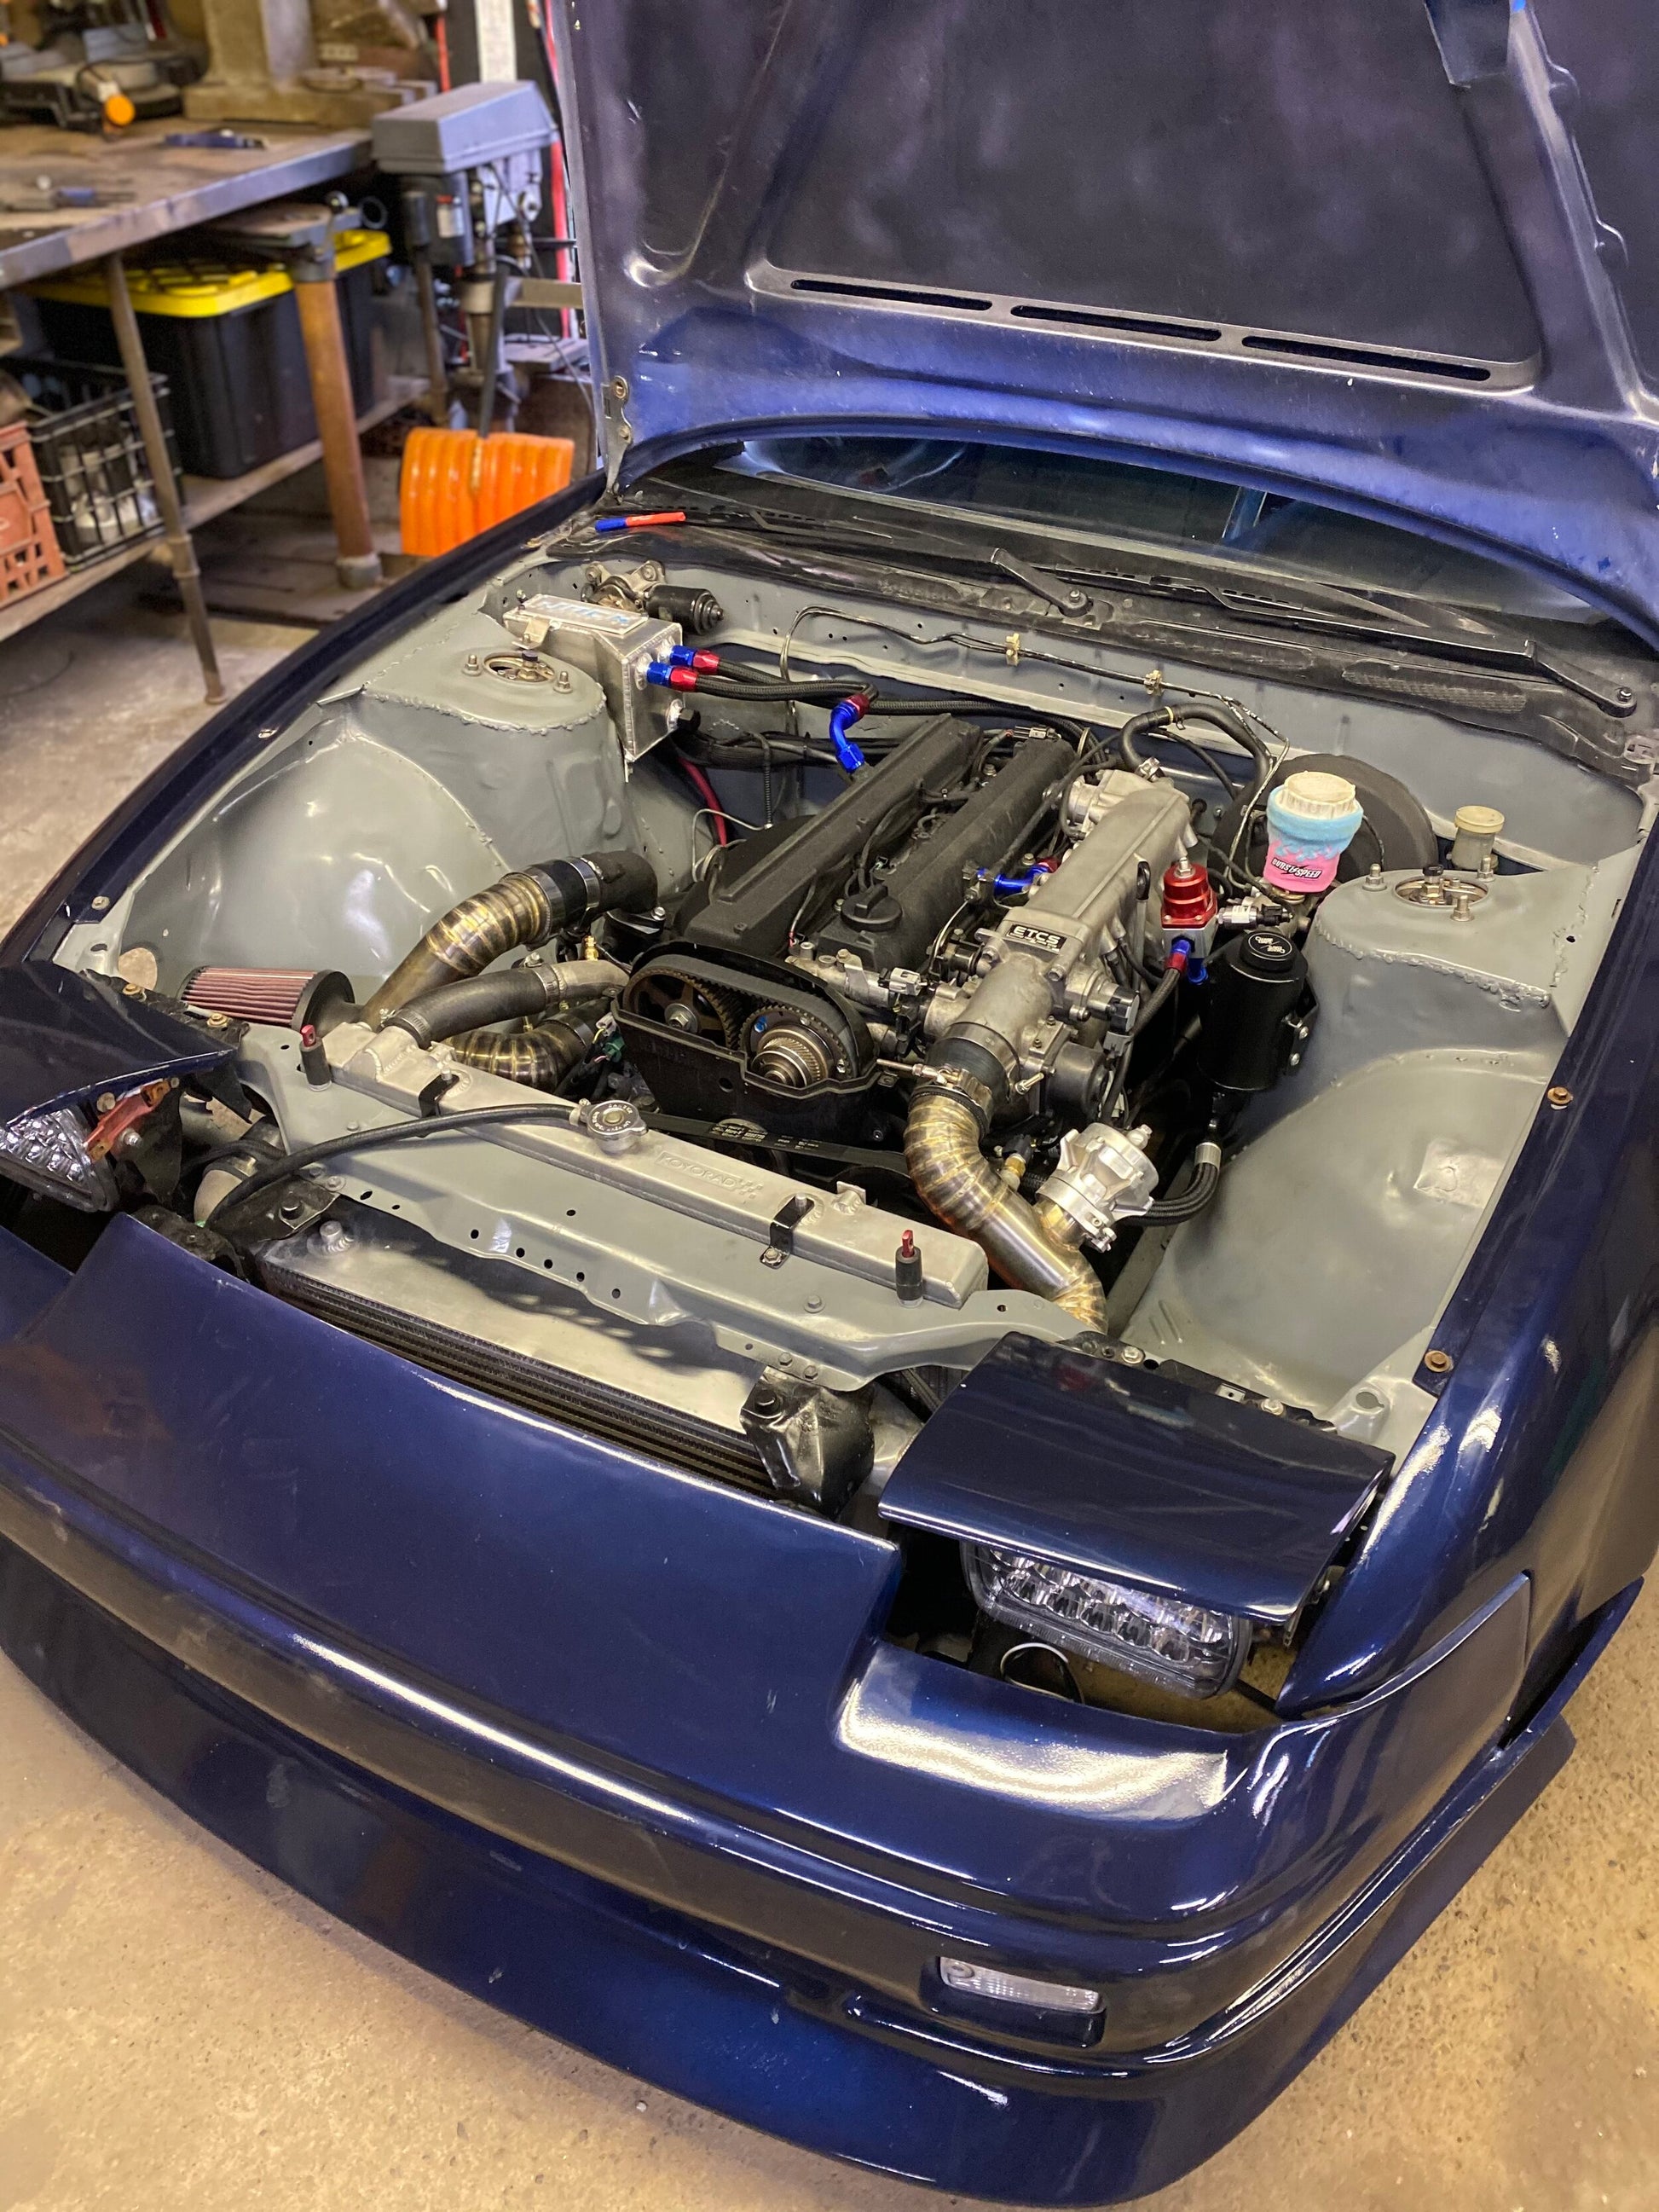 Nissan 240SX S13 LHD - Tucked Oil Catch Can